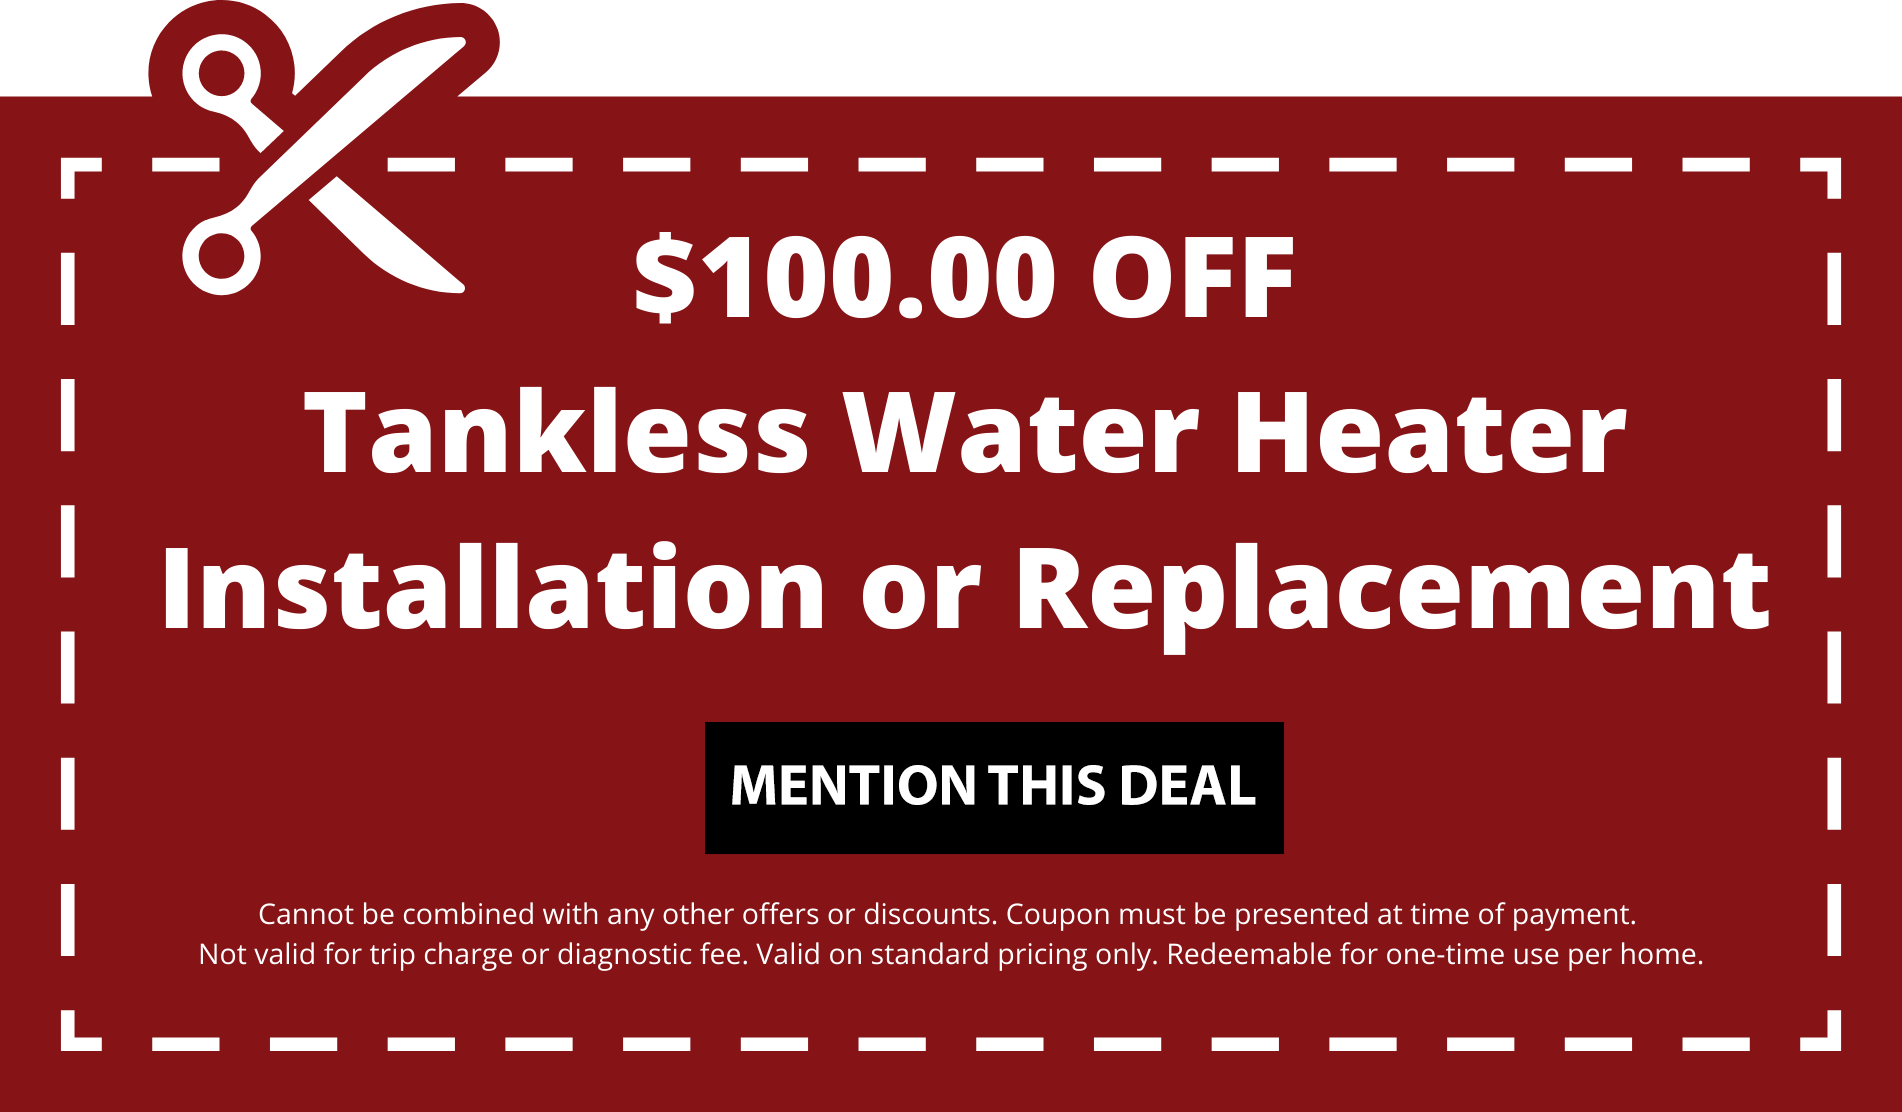 Tankless Water Heater Coupon Dallas